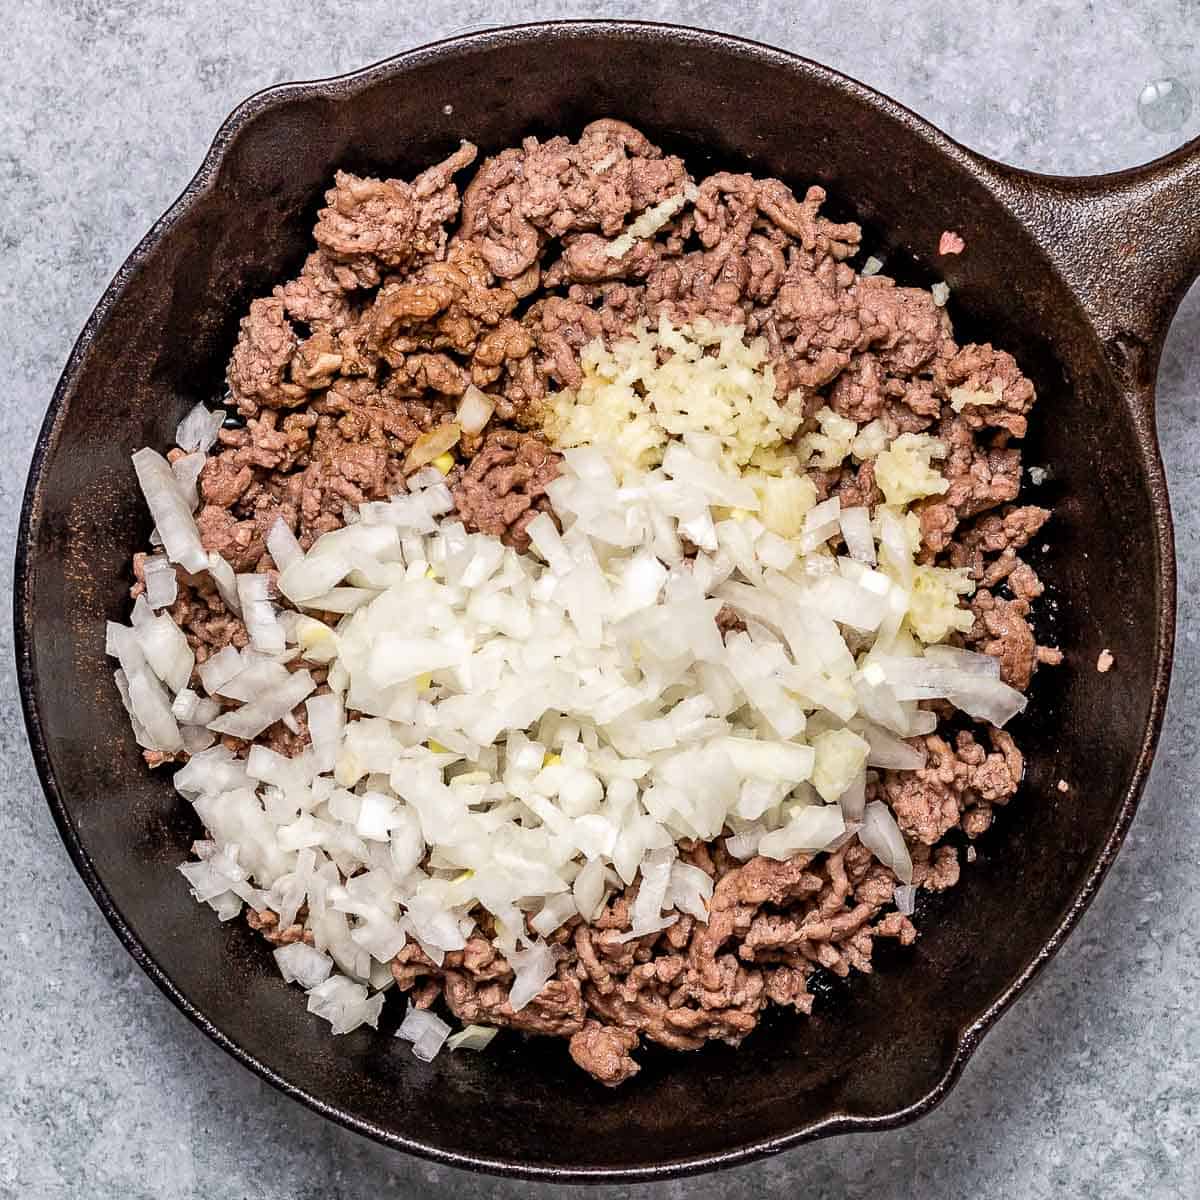 Cooking ground beef and onion in a skillet.